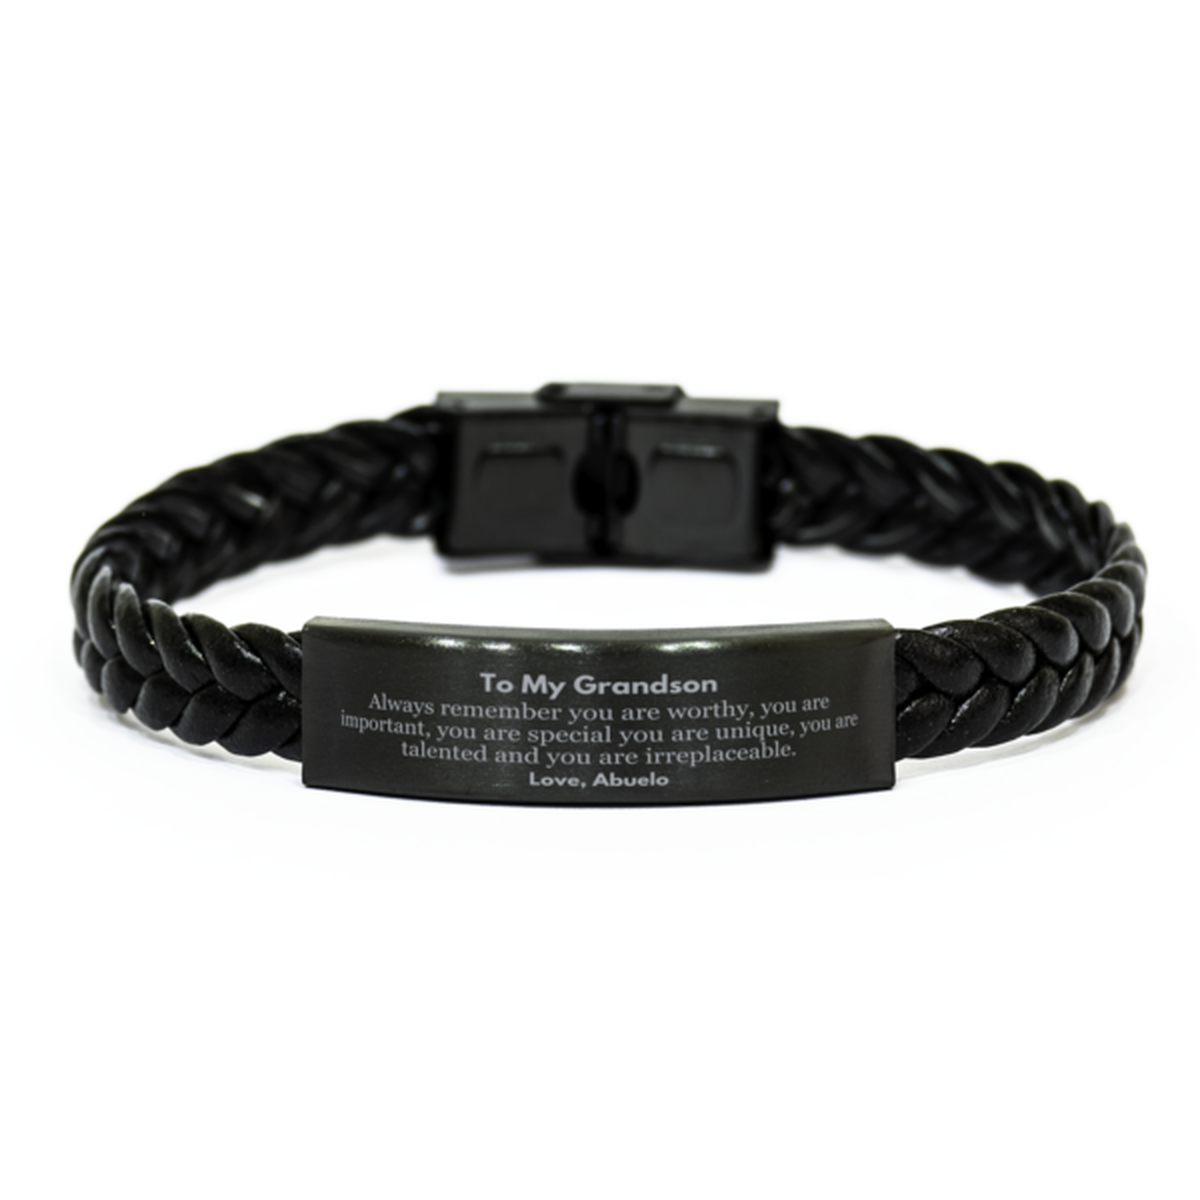 Grandson Birthday Gifts from Abuelo, Inspirational Braided Leather Bracelet for Grandson Christmas Graduation Gifts for Grandson Always remember you are worthy, you are important. Love, Abuelo